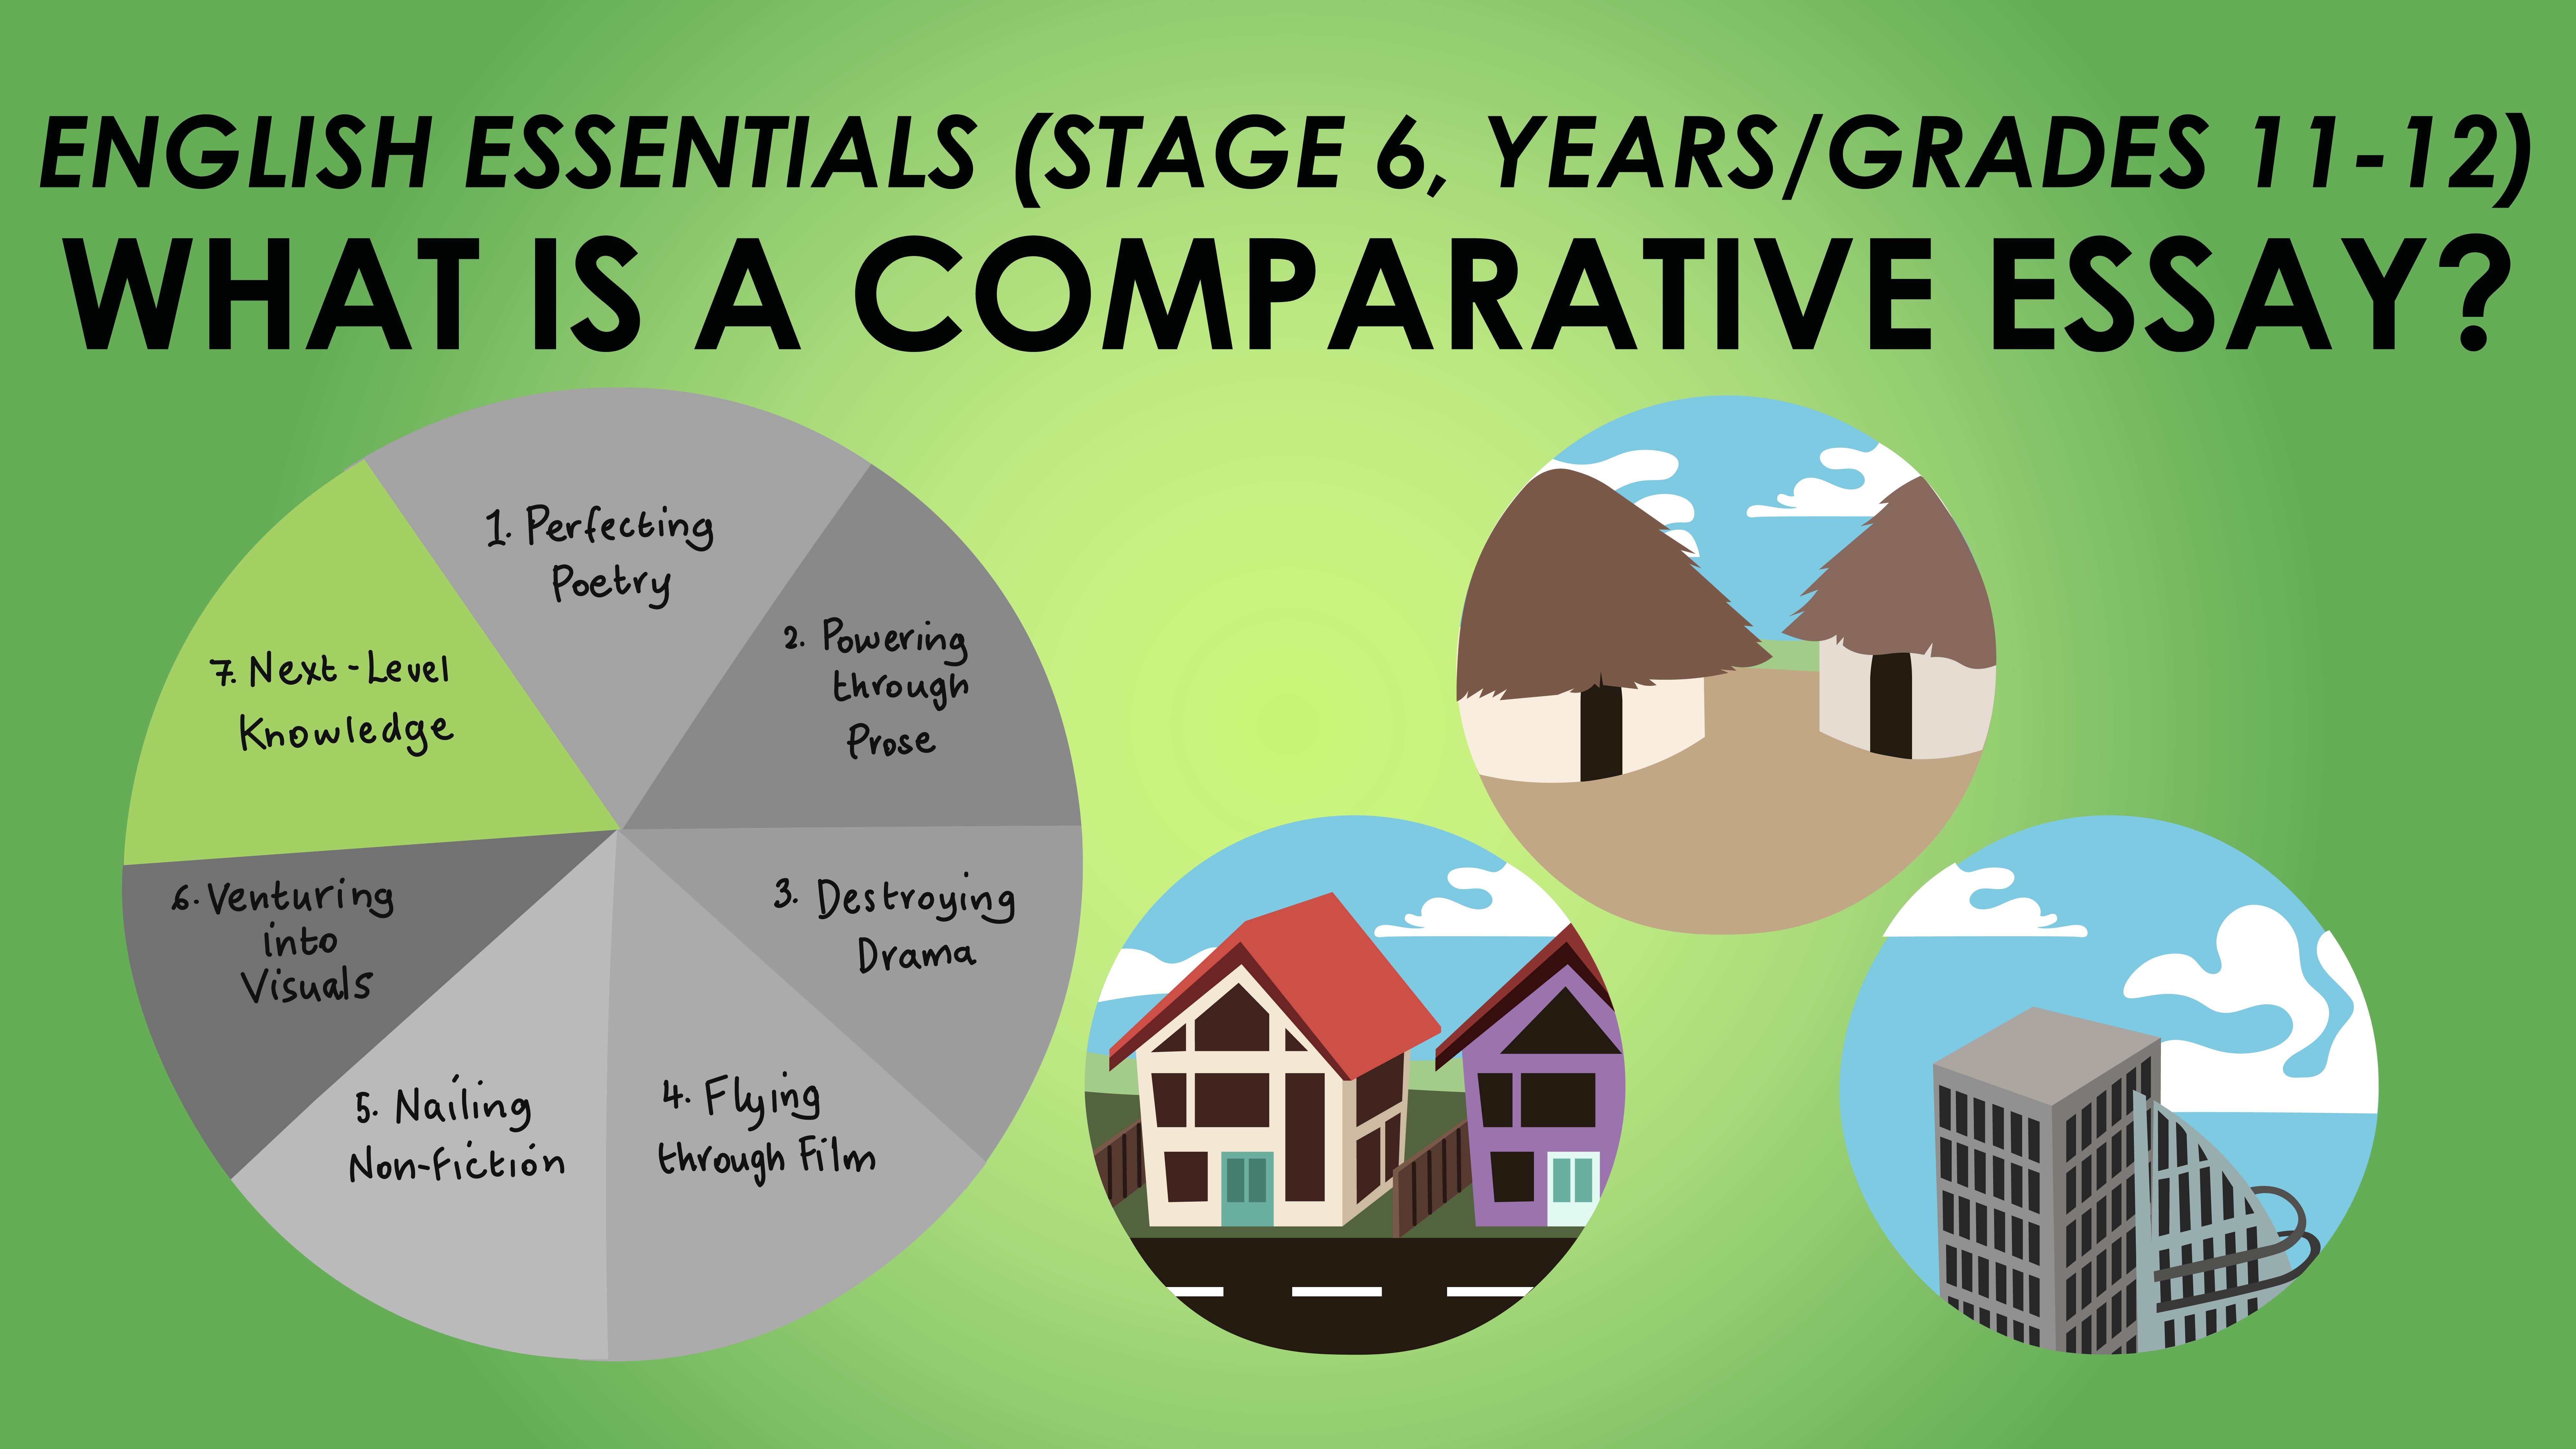 English Essentials - Next Level Knowledge - What is a Comparative Essay? (Stage 6, Years/Grades 11-12)